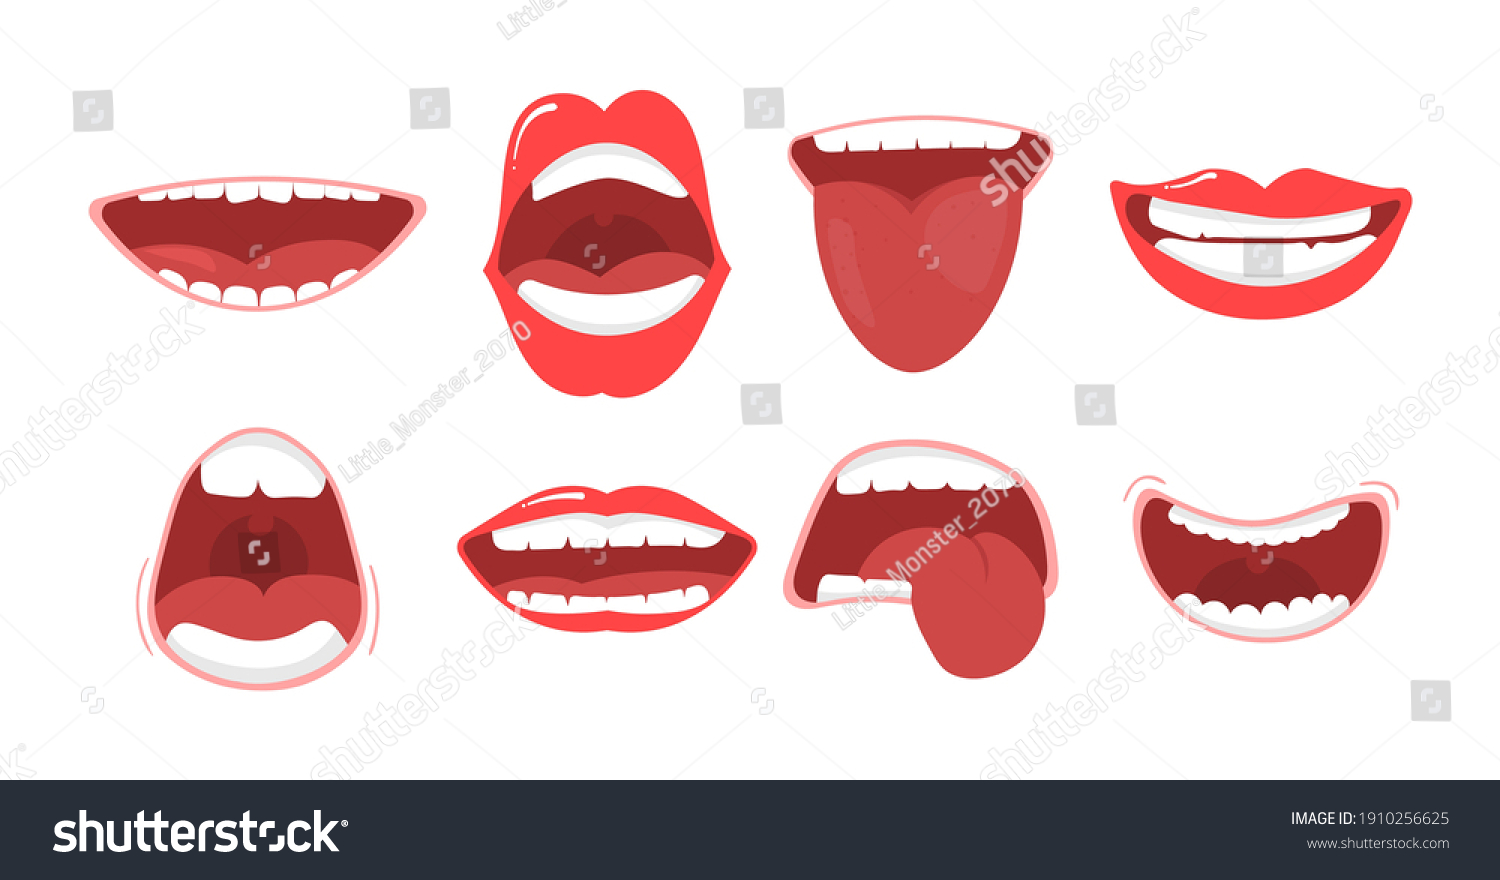 17,650 Open Mouth Drawing Images, Stock Photos & Vectors ...